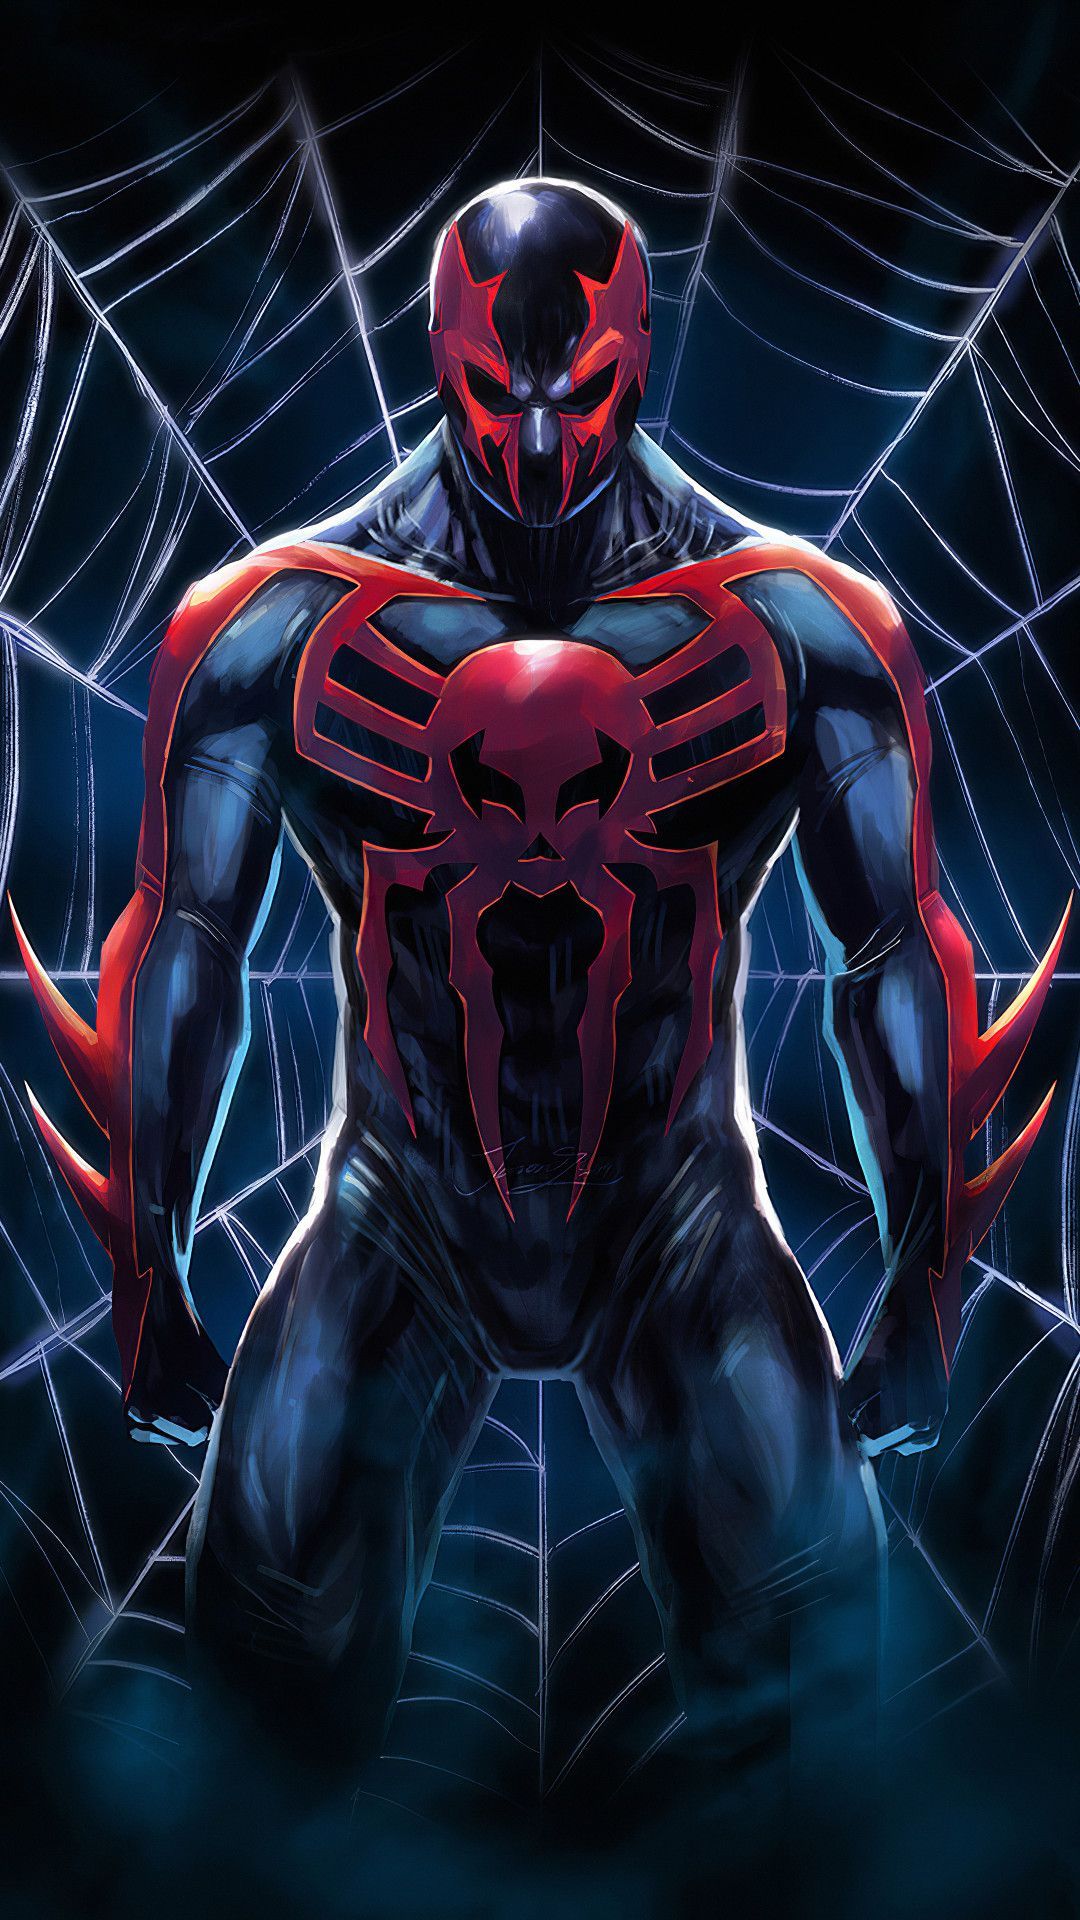 Spiderman2099 Art Mobile Wallpaper iPhone, Android, Samsung